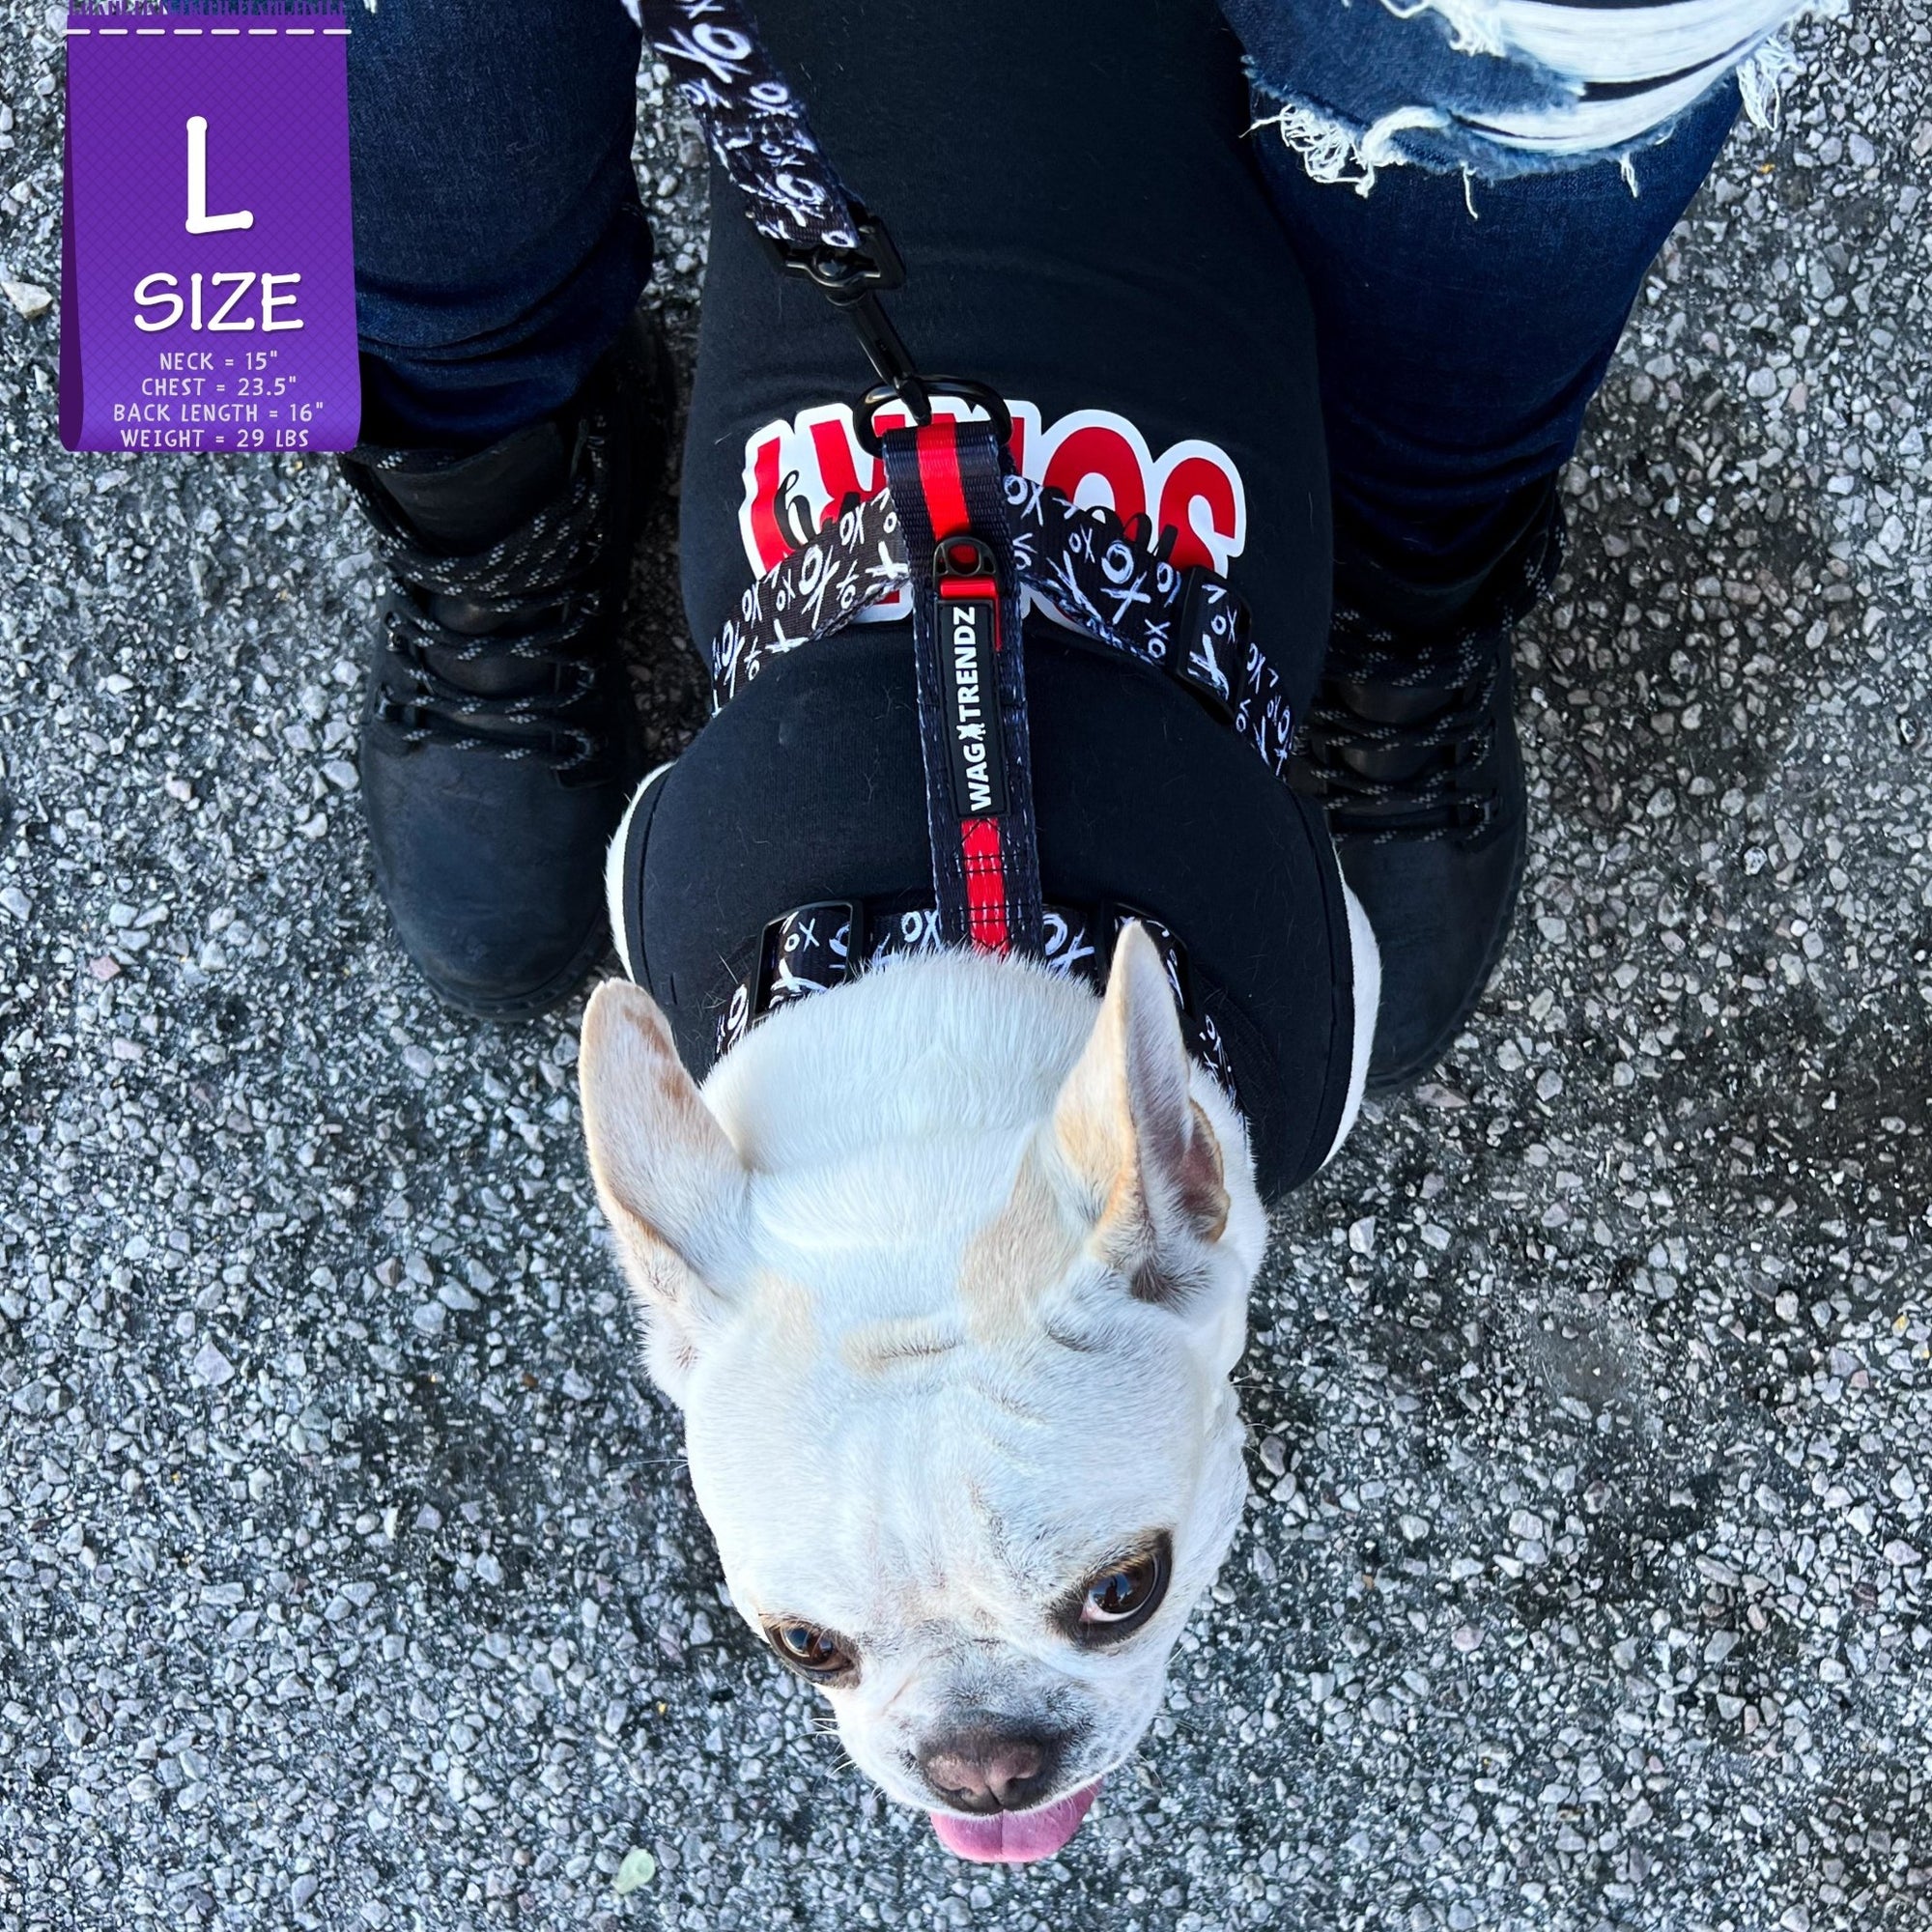 Dog T-Shirt - French Bulldog wearing &quot;Sorry Not Sorry&quot; black dog t-shirt with red and white lettering on back - standing outdoors in a parking lot wearing XO H harness and matching leash in black, white and red - Wag Trendz